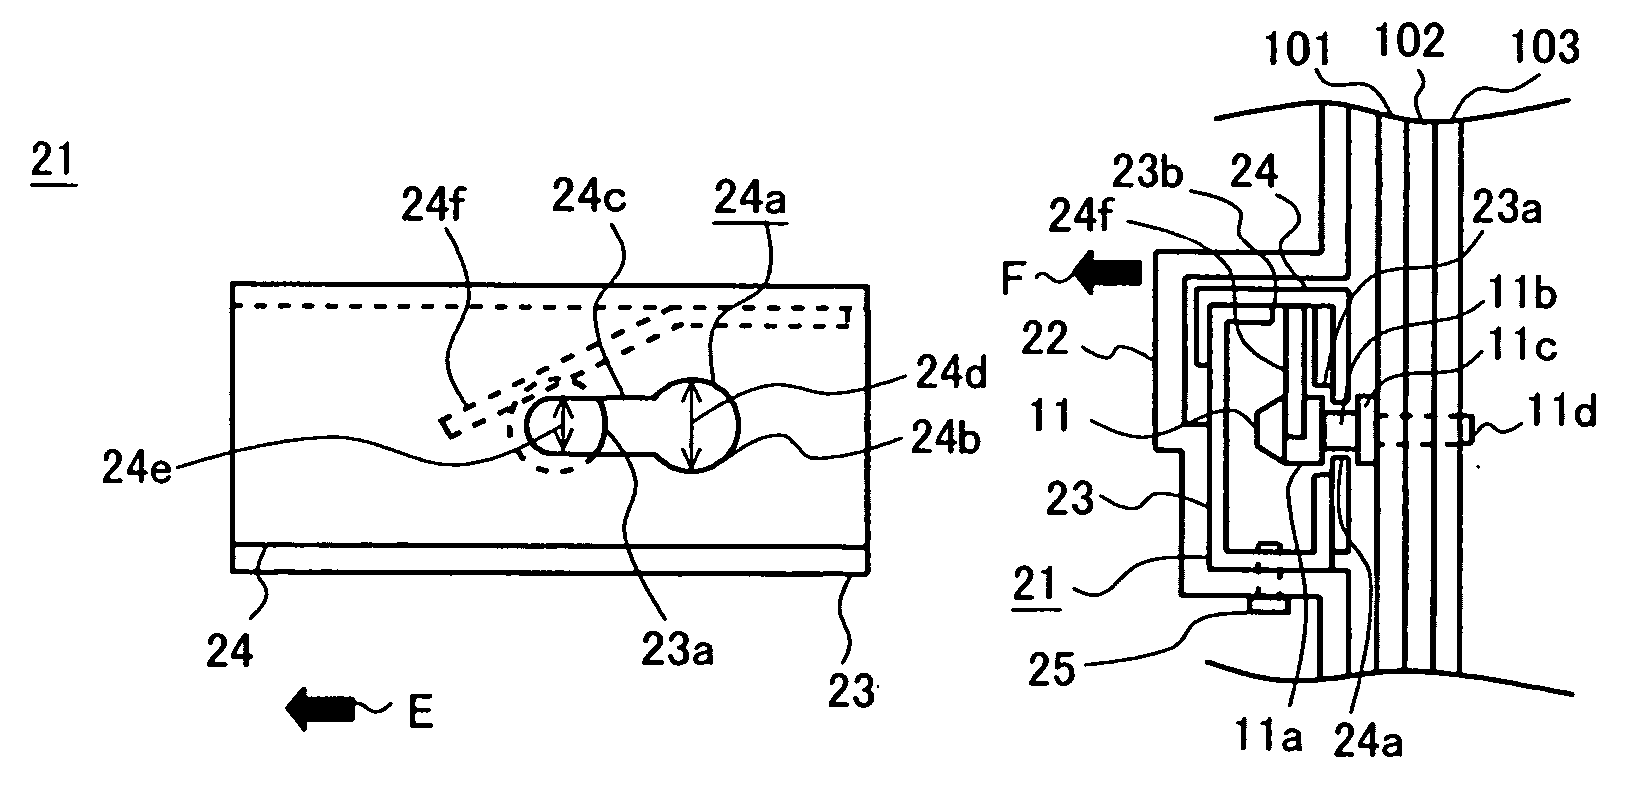 Connection device, image forming apparatus and optional device equipped with the same